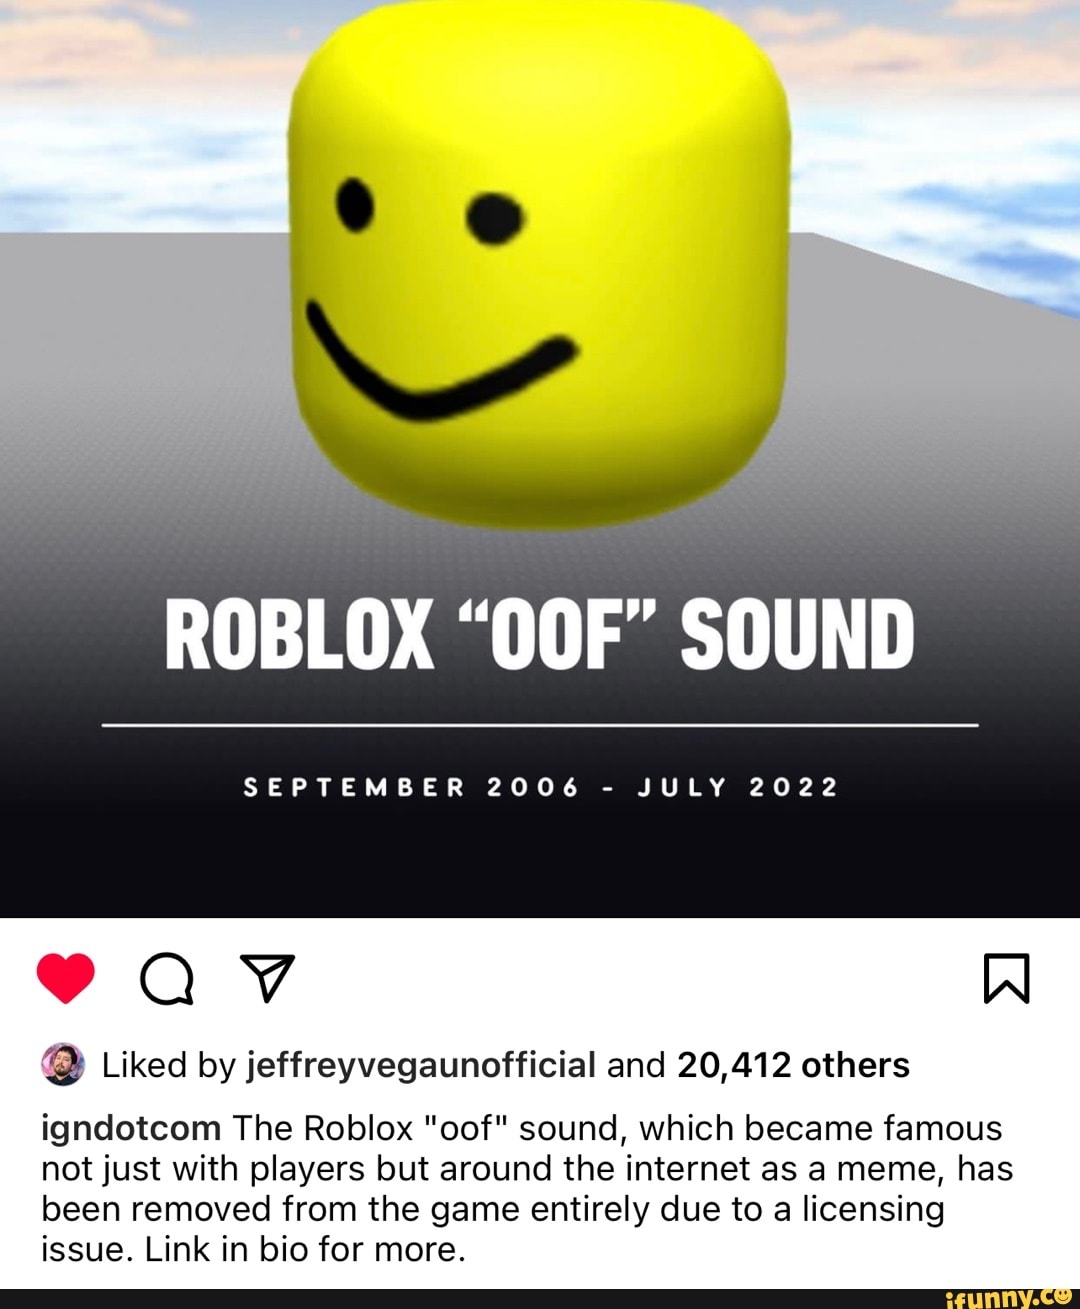 Roblox Oof Sound Being Removed Today Due to Licensing Dispute